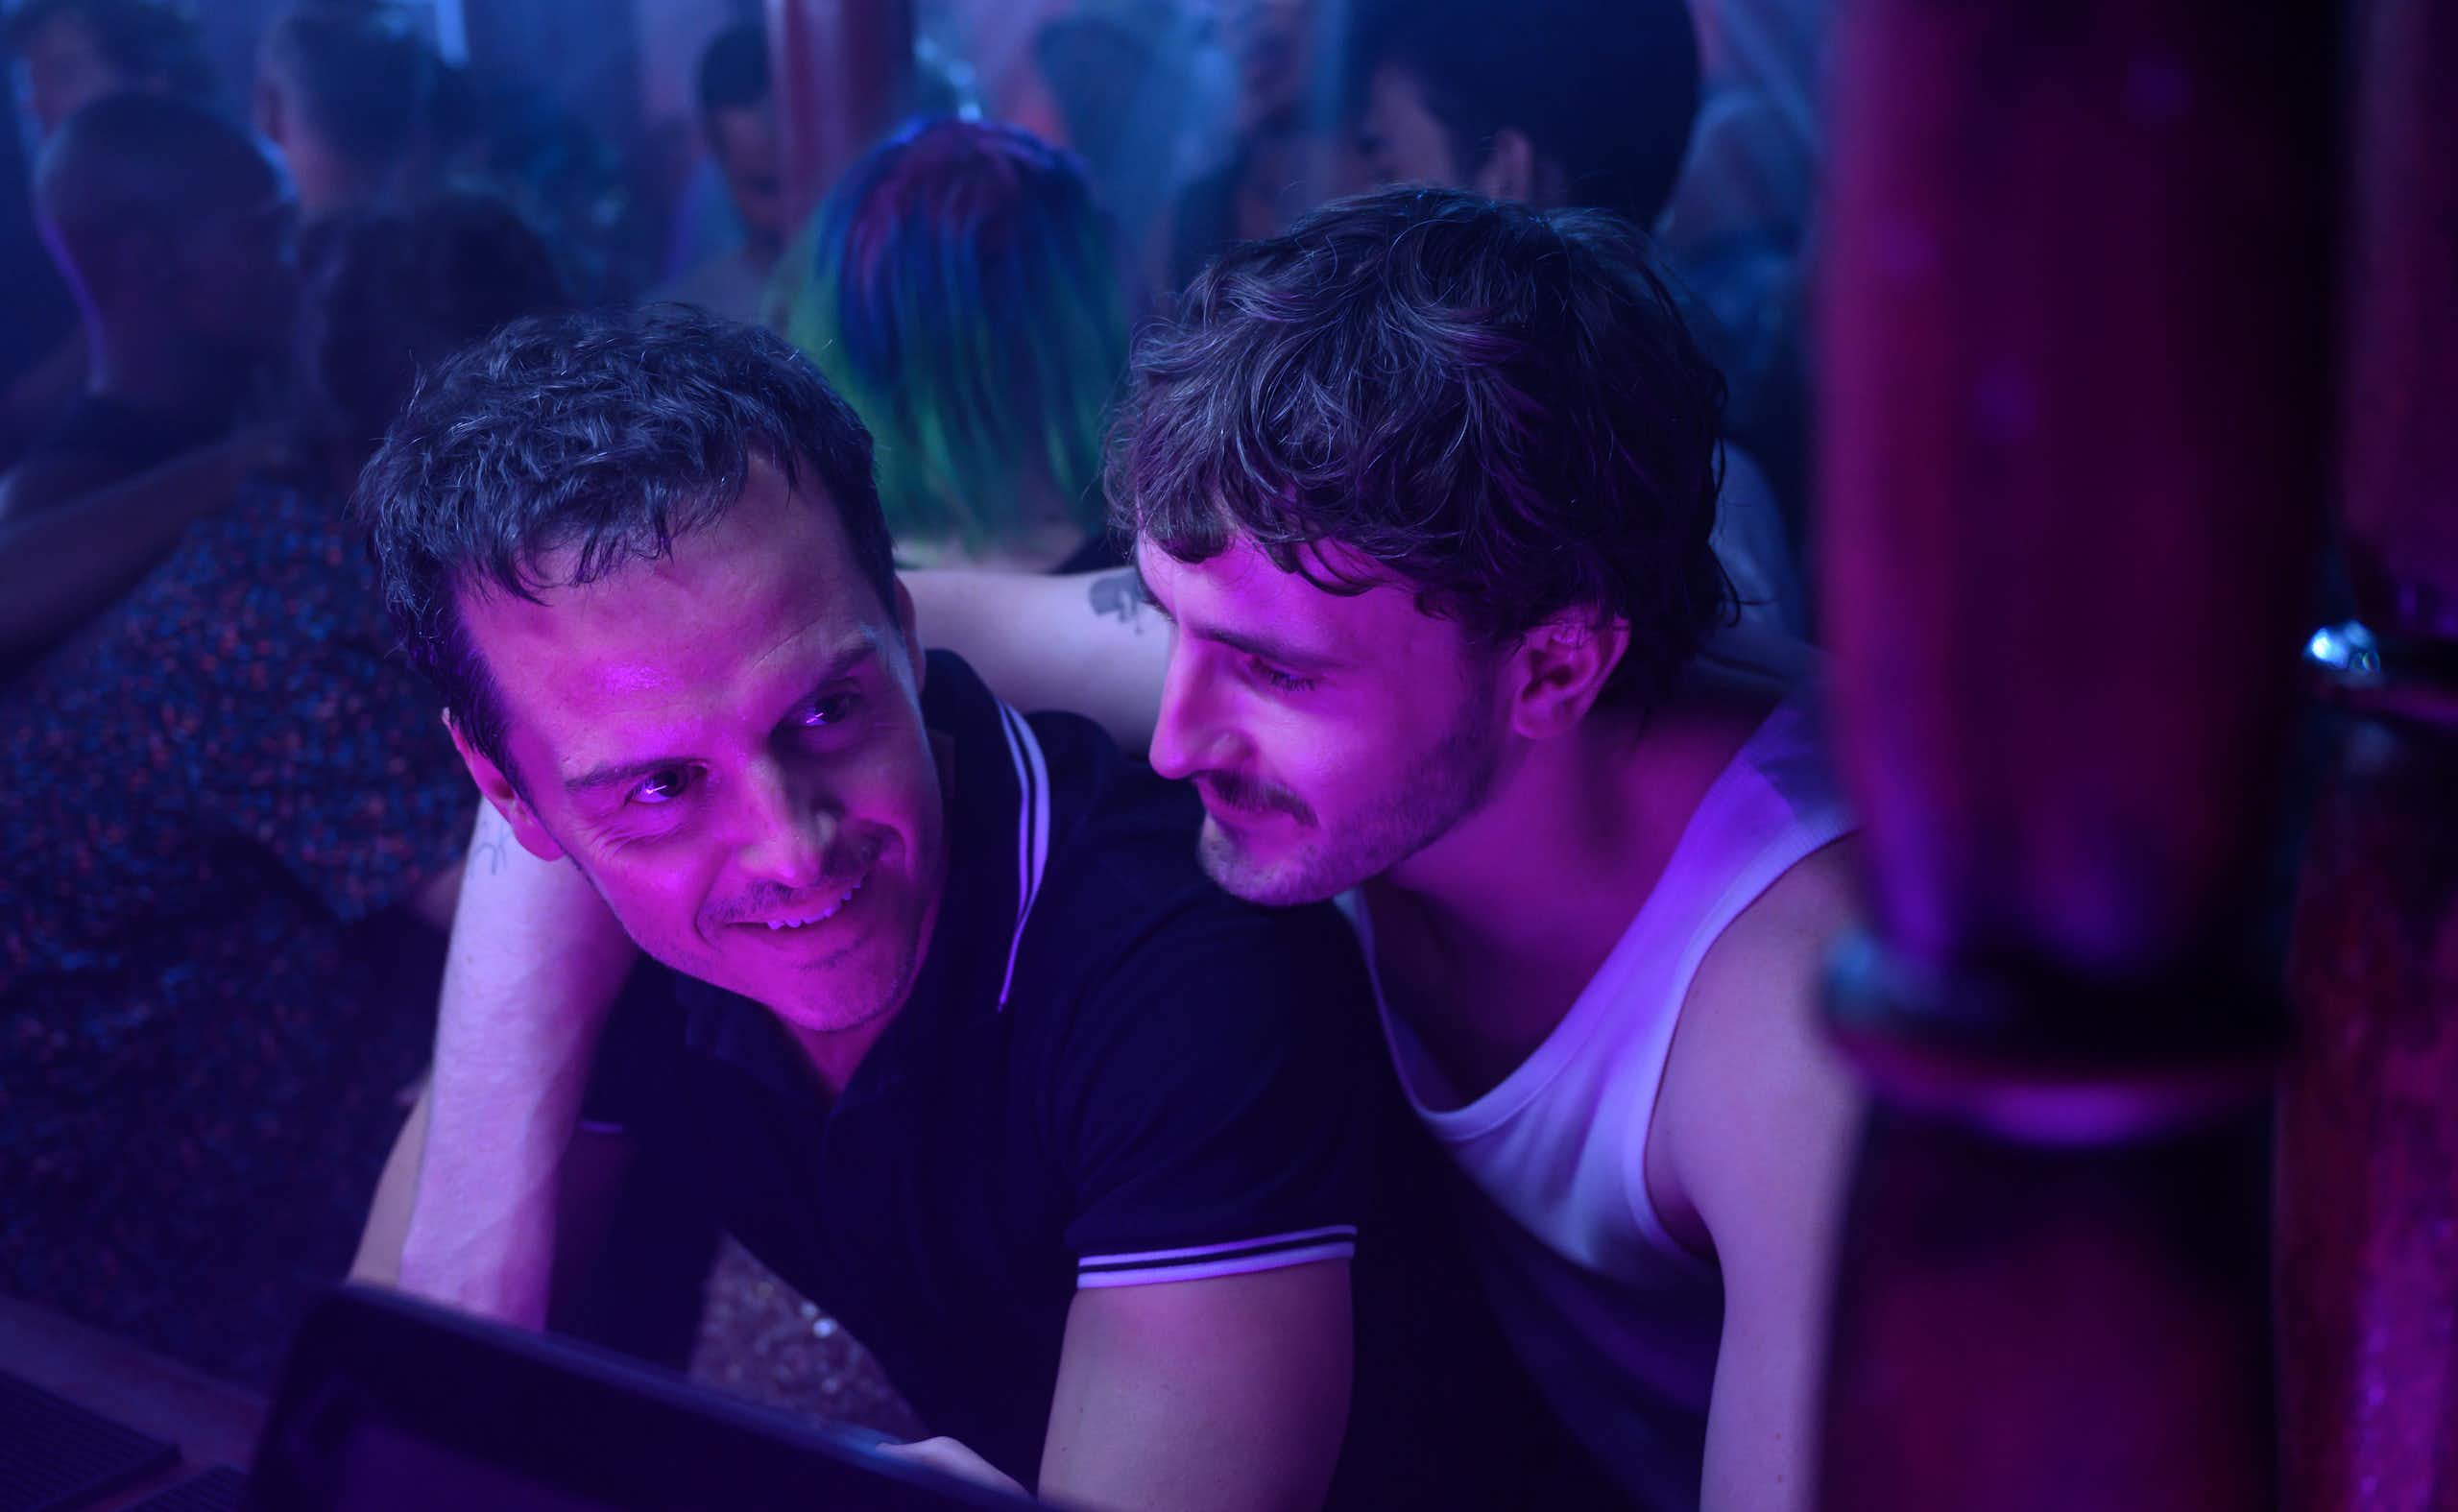 Two men embrace at a club